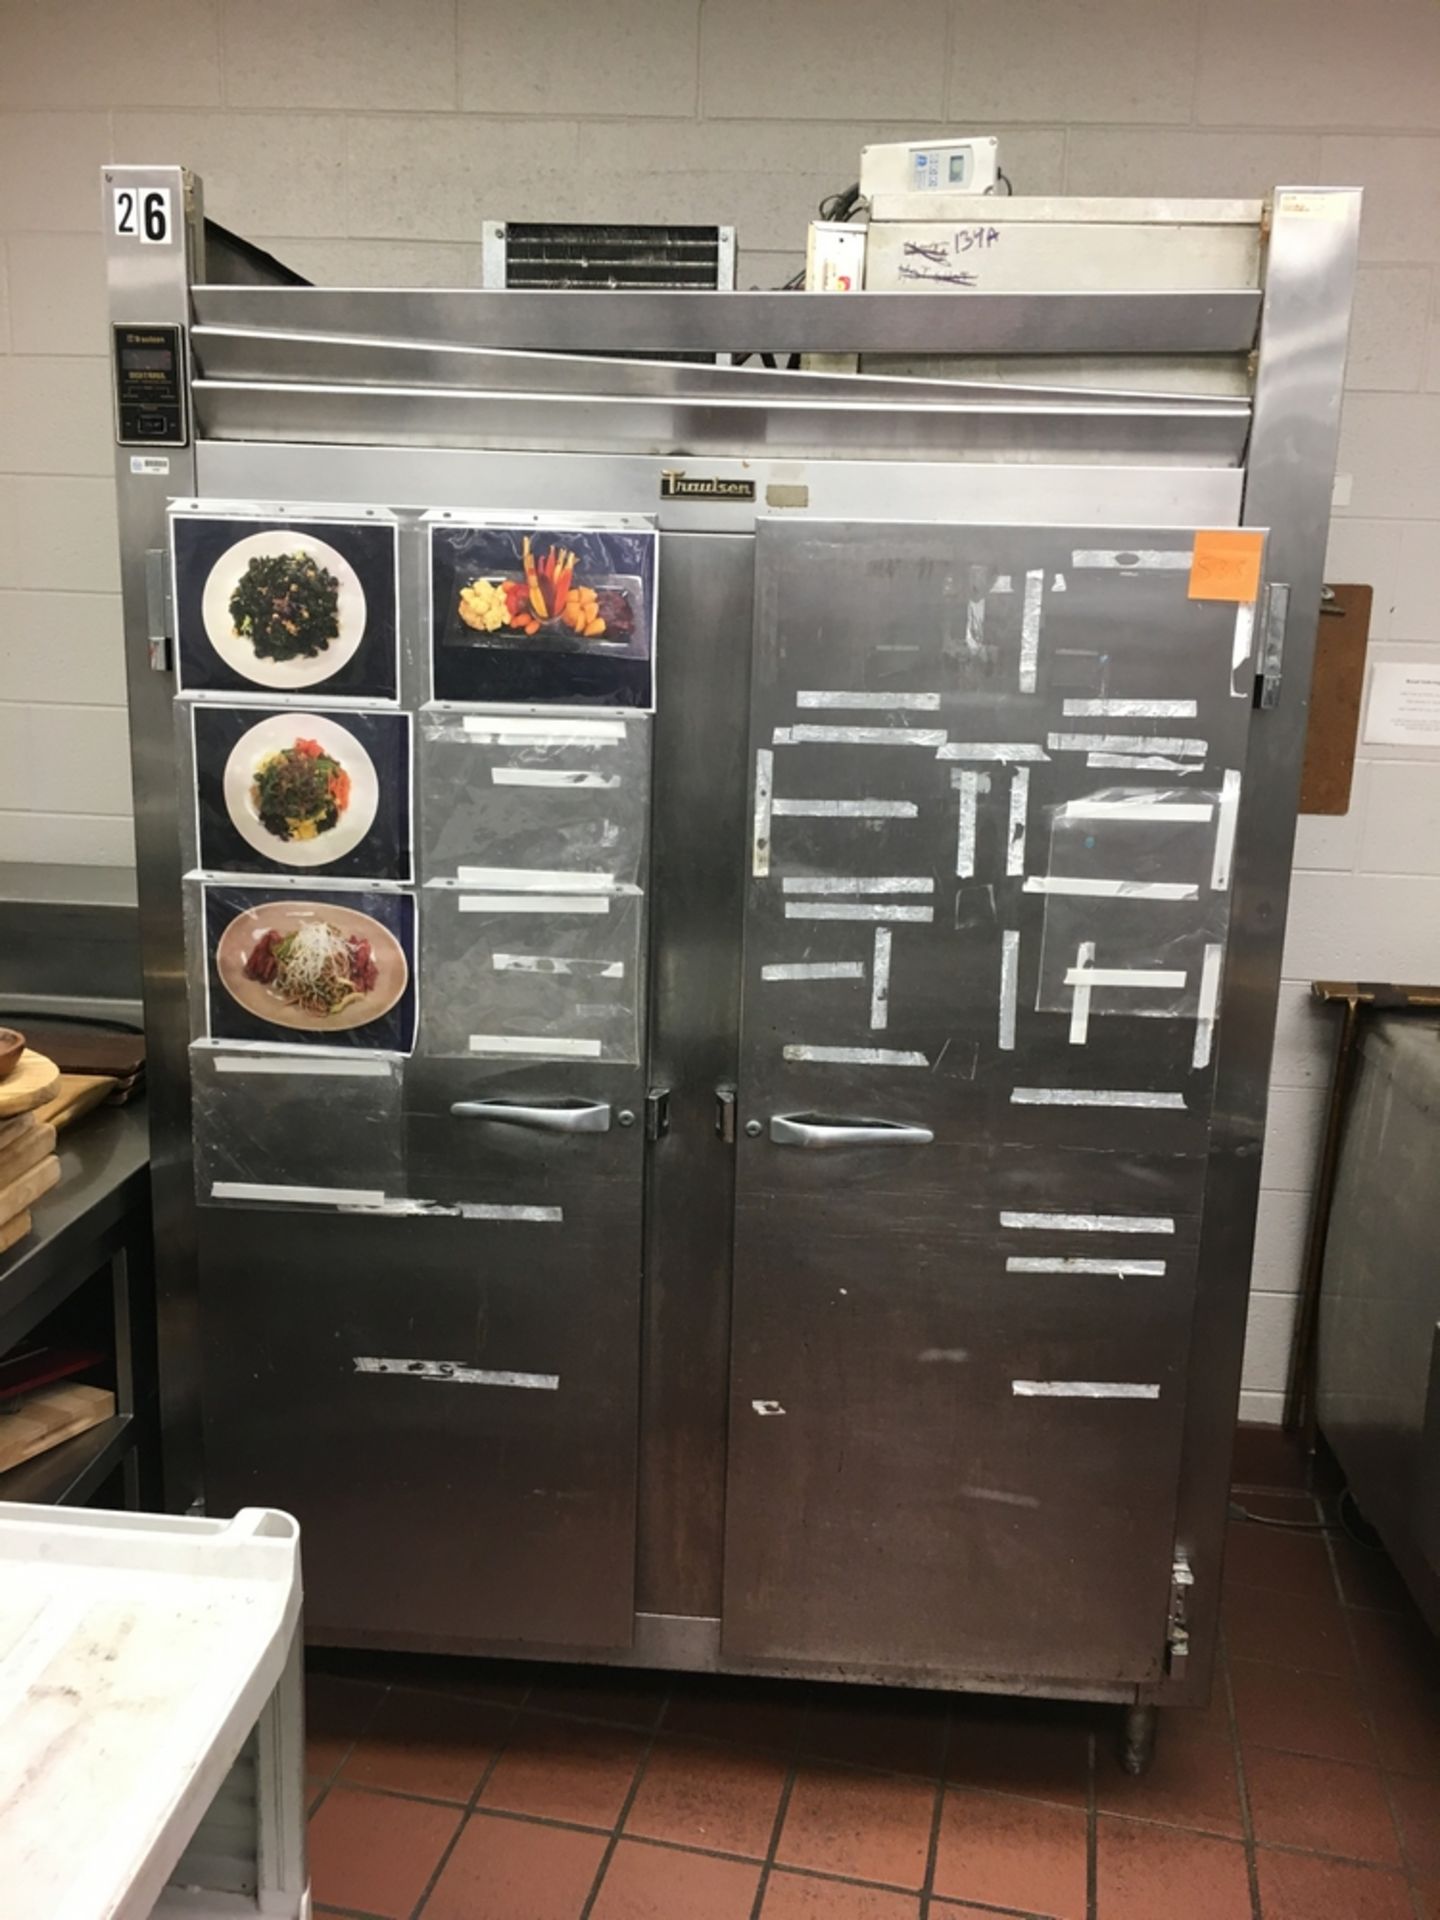 SS Refrigerator, double door, Traulsen, 5 ft x 3 ft x 7 ft Located: Main Kitchen, adjacent to Palace